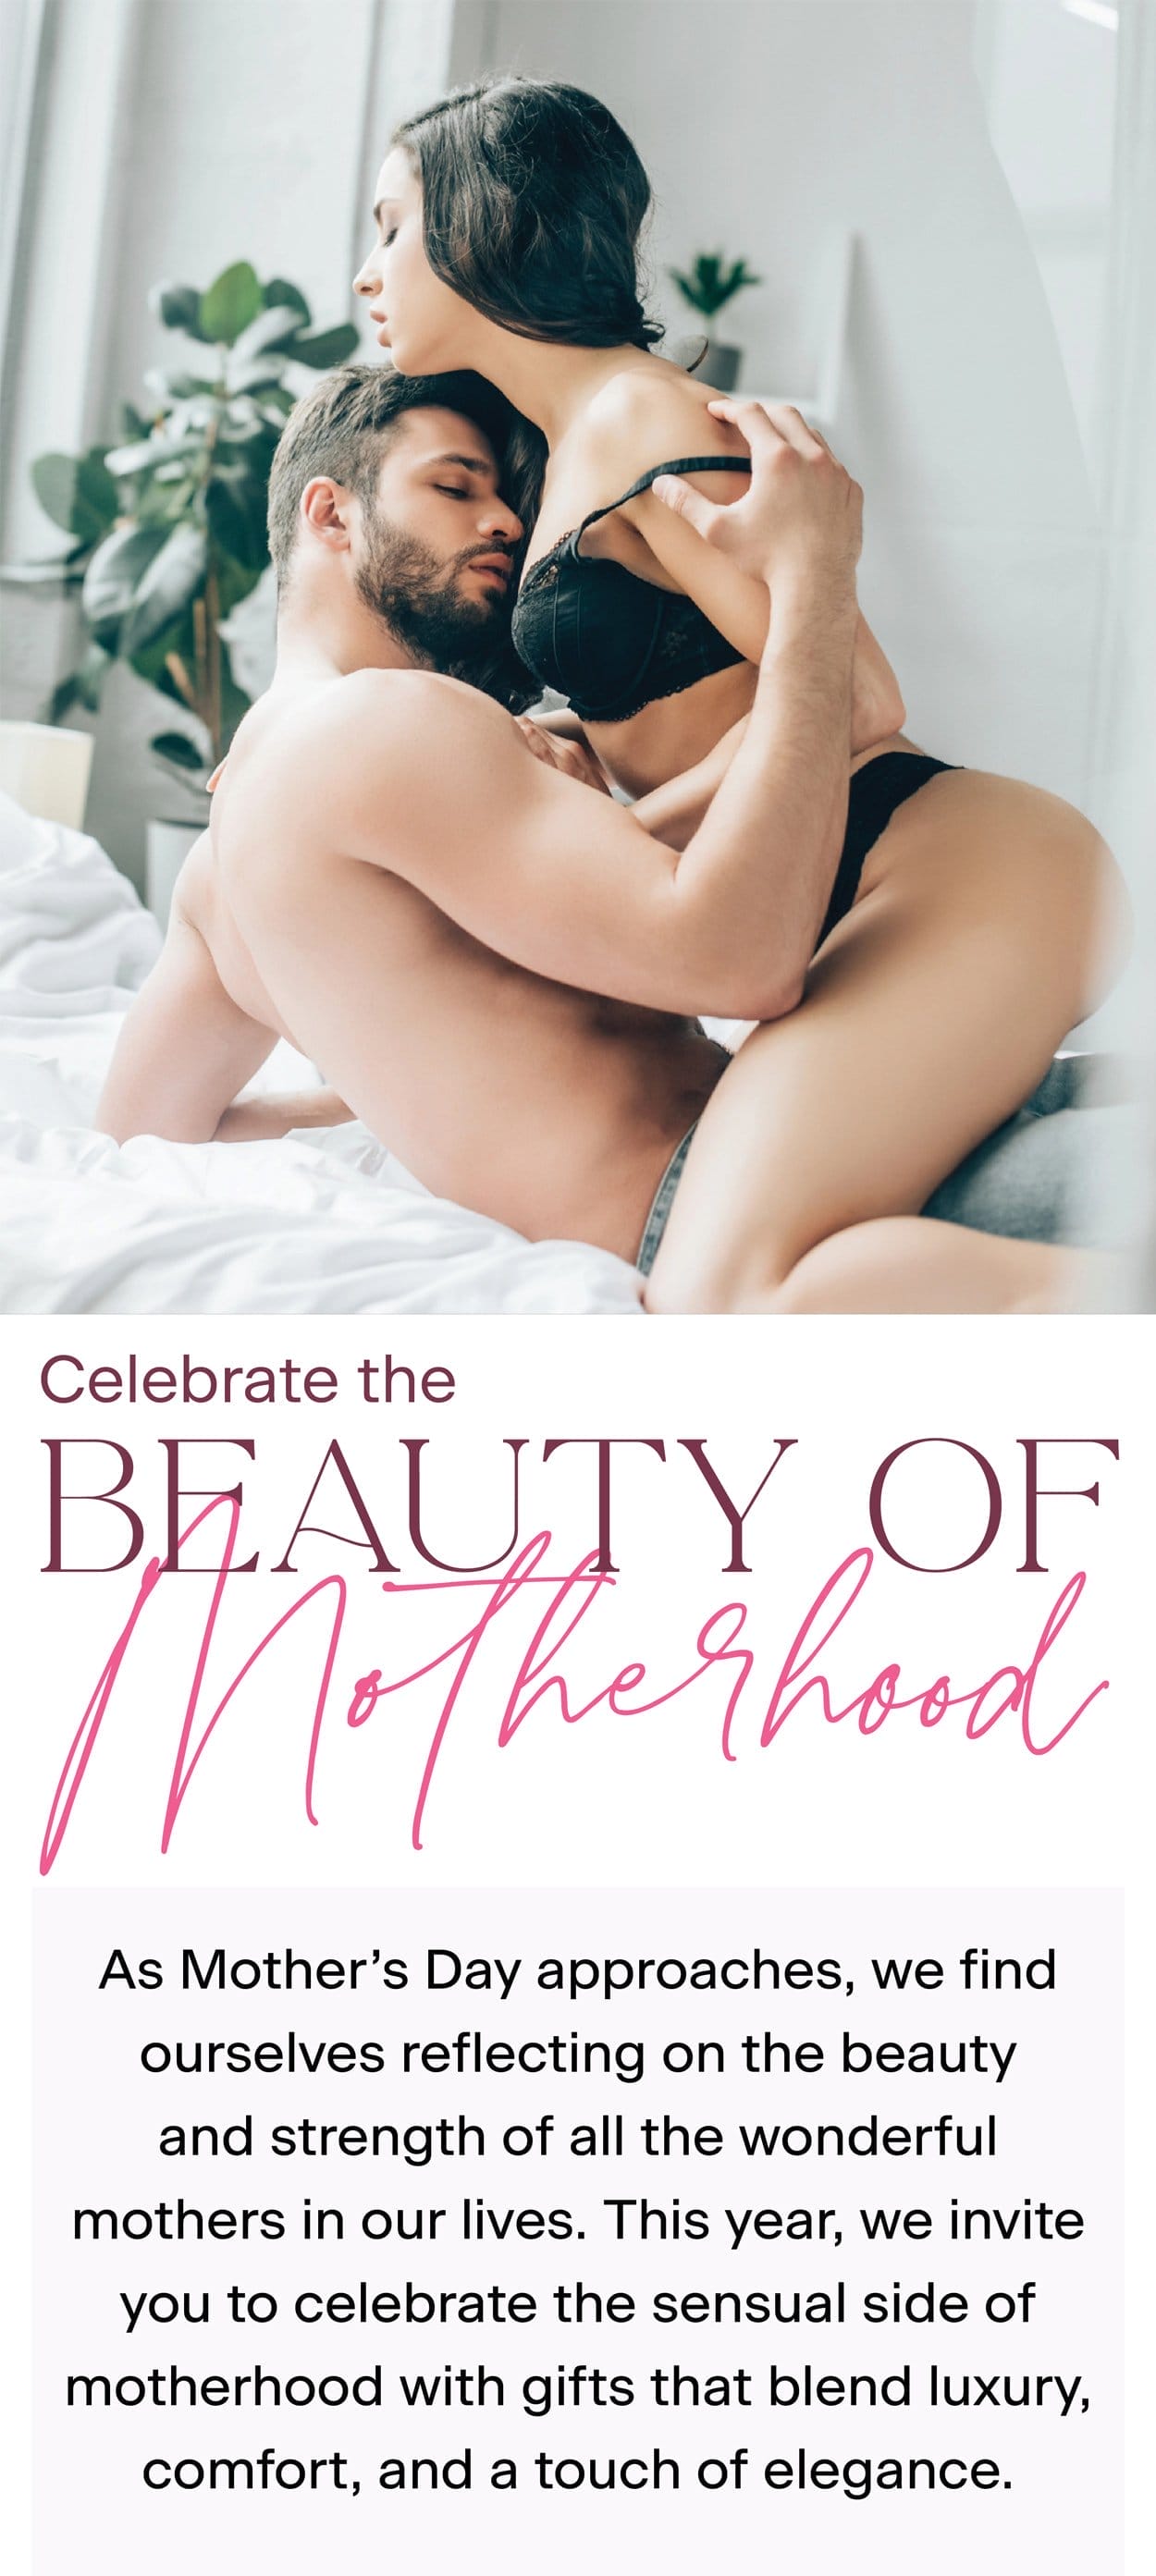 Celebrate the Beauty of Motherhood. As Mother's Day approaches, we find ourselves reflecting on the beauty and strength of all the wonderful mothers in our lives. This year, we invite you to celebrate the sensual side of motherhood with gifts that blend luxury, comfort, and a touch of elegance.